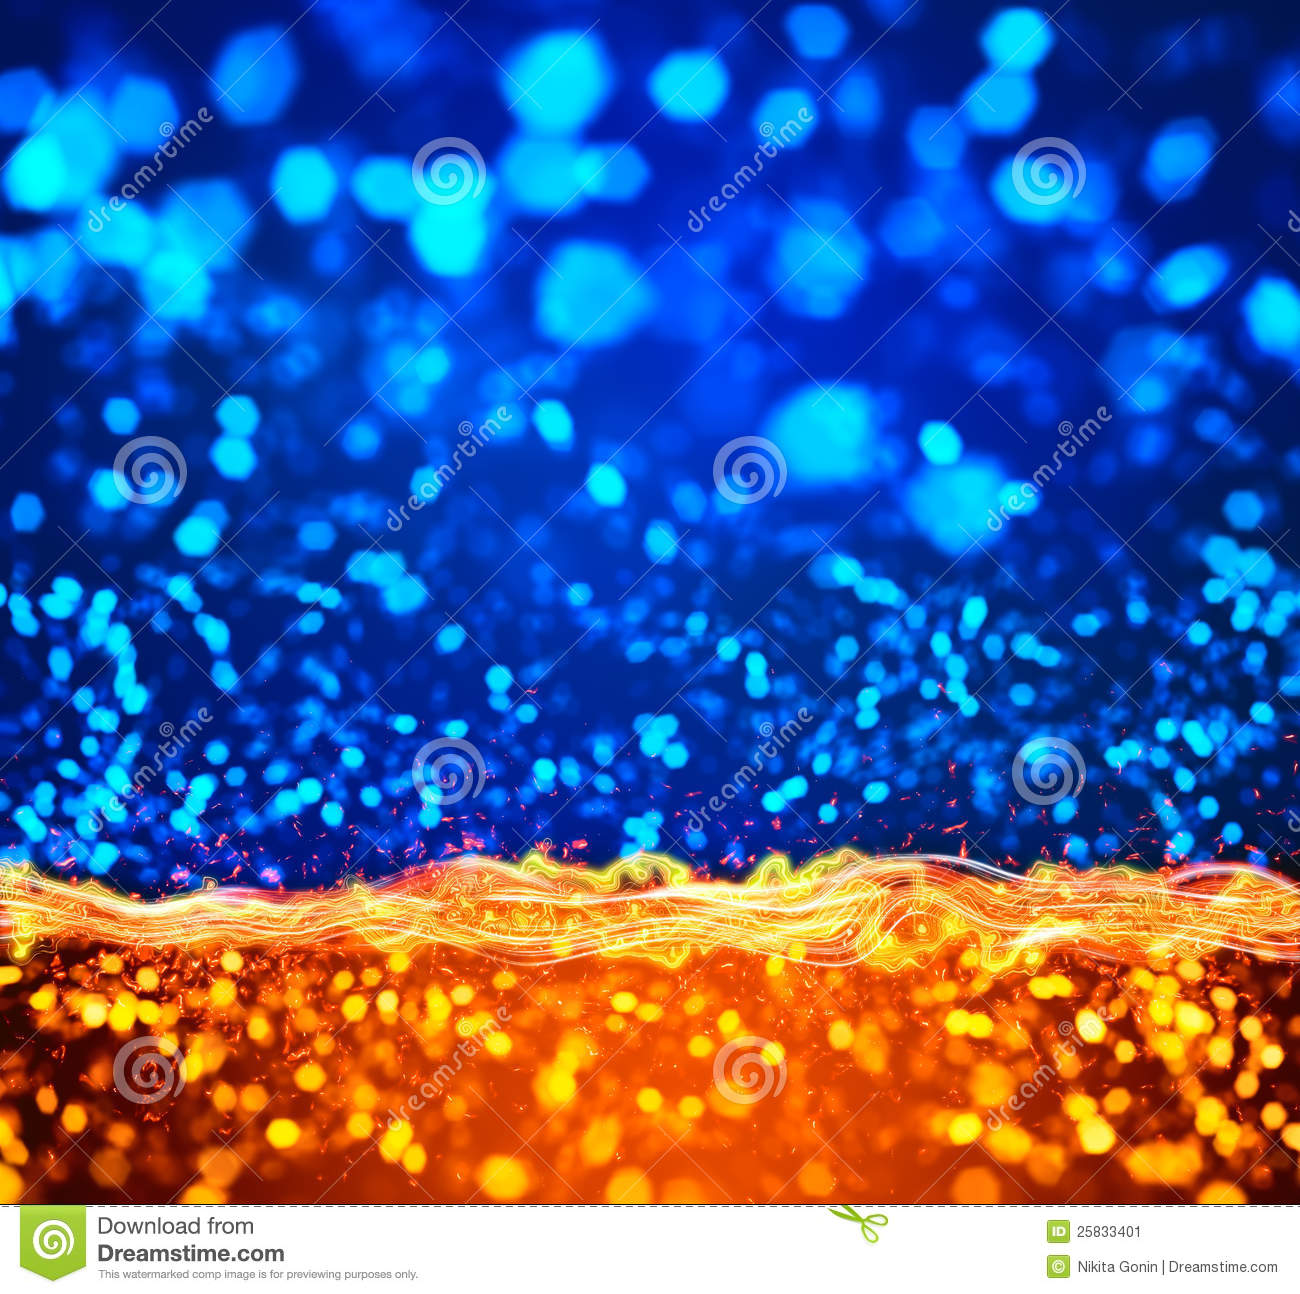 Cool Orange And Blue Backgrounds Blue orange lights abstract